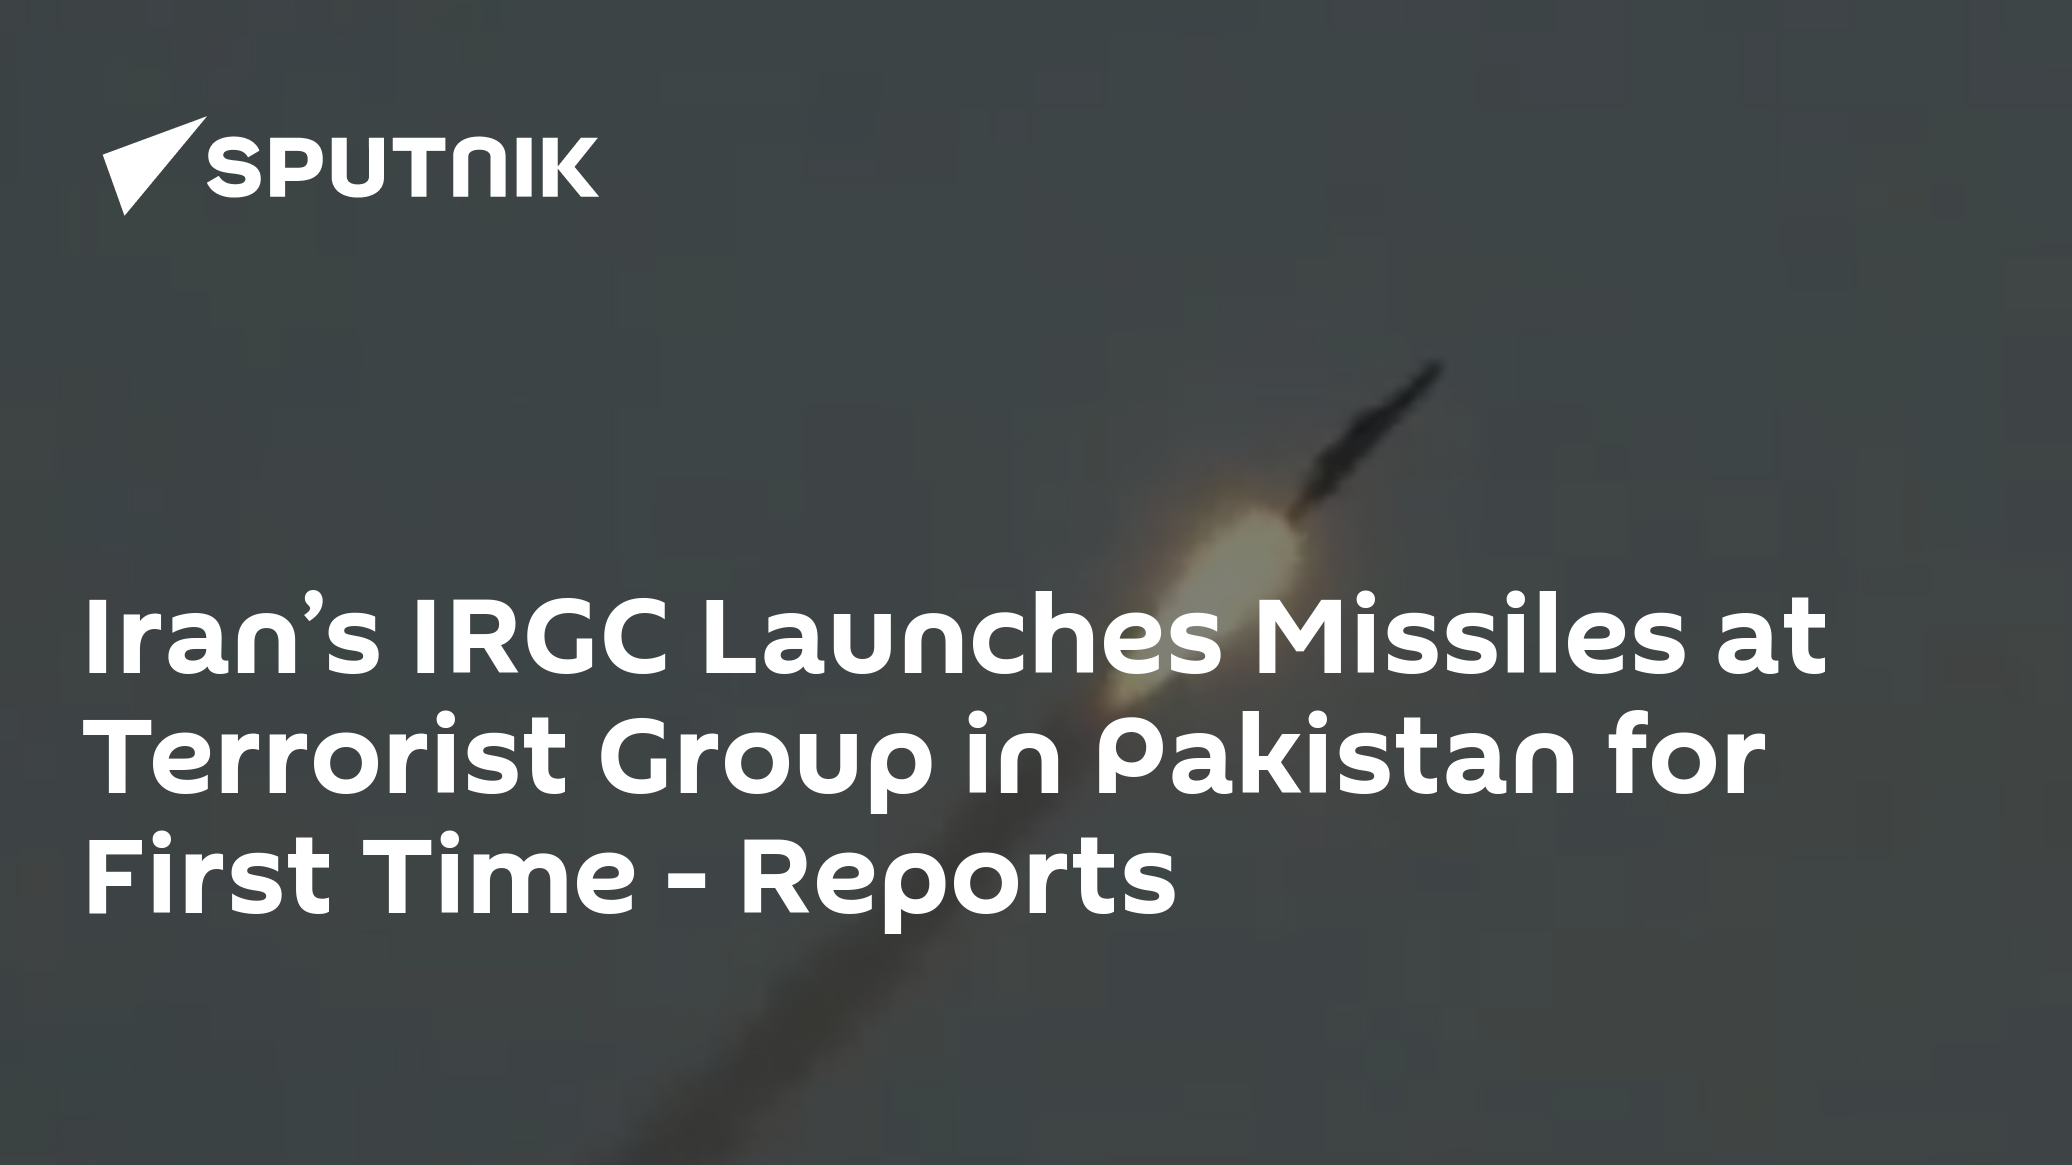 Iran’s IRGC Launches Missiles at Terrorist Group in Pakistan for First Time – Reports